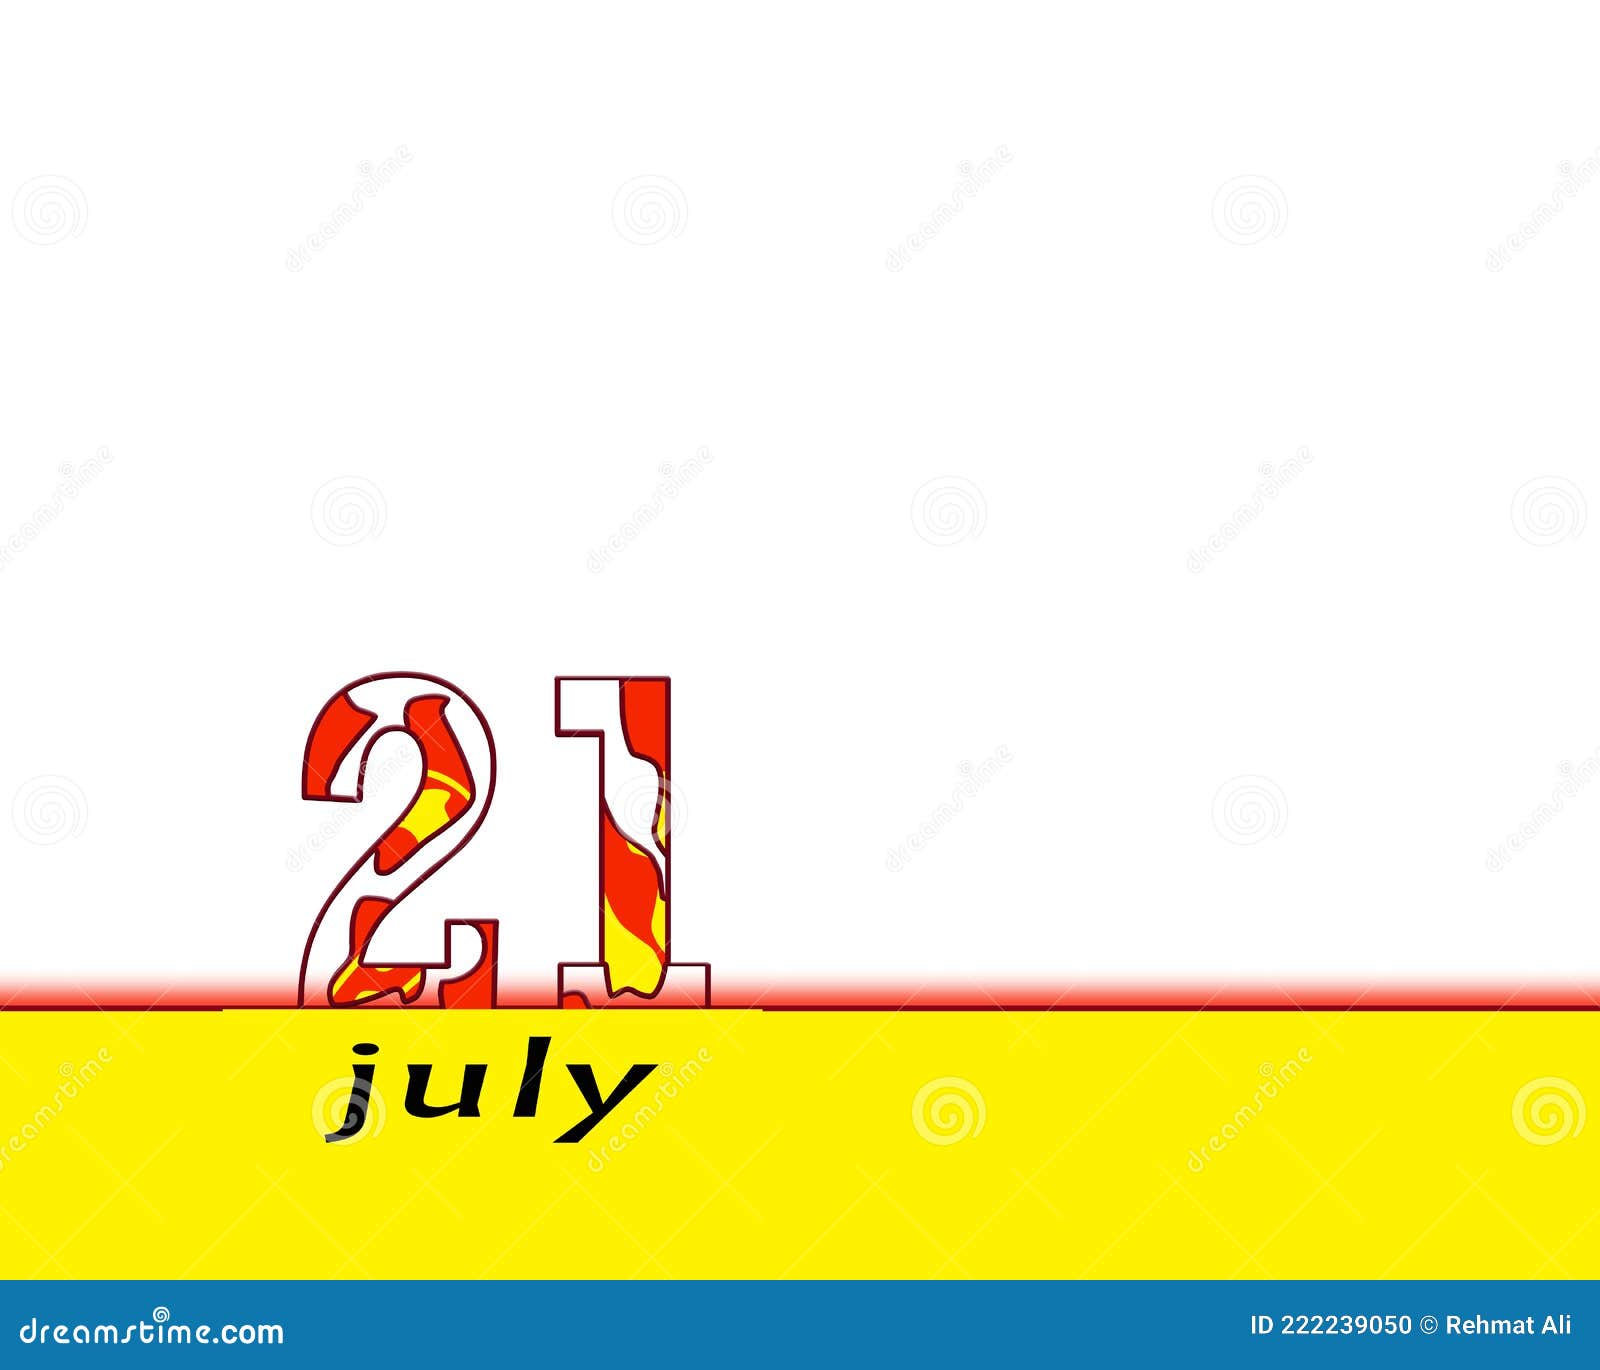 July 21 Calendar On White And Yellow Background Stock Illustration